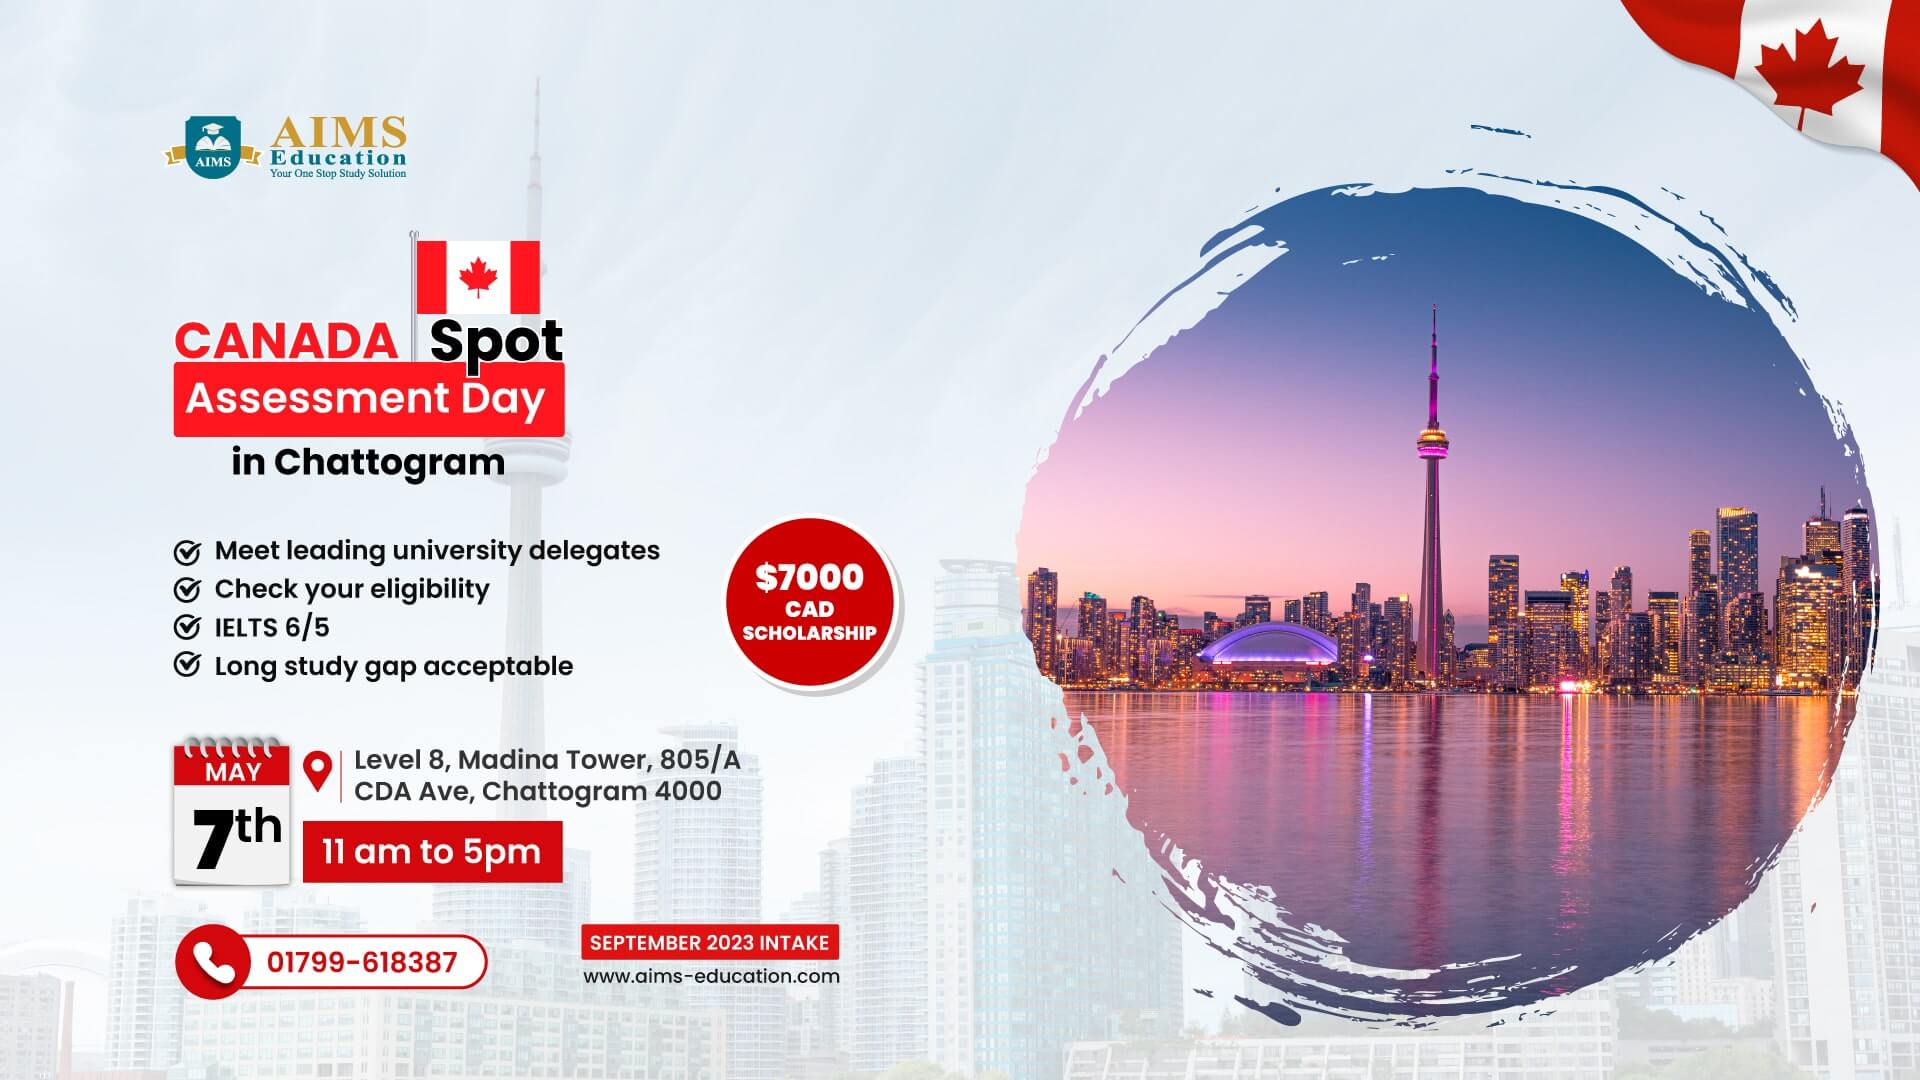 Canada Spot Assessment Day in Chattogram